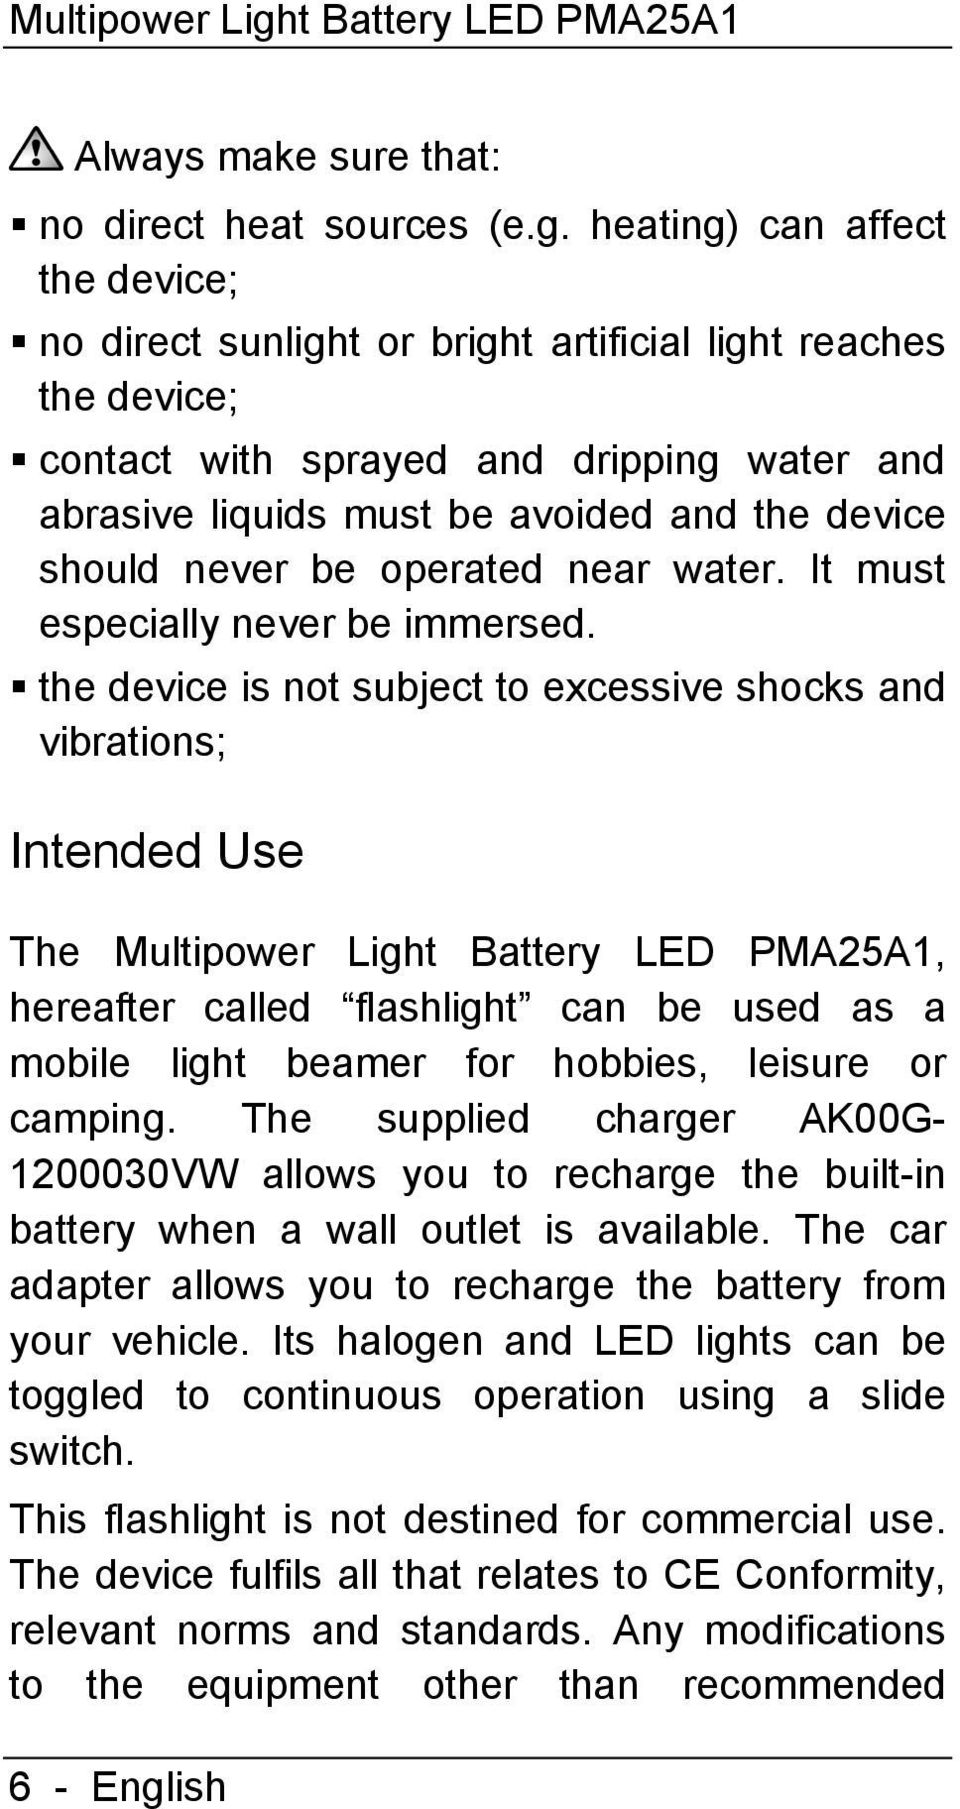 heating) can affect the device; no direct sunlight or bright artificial light reaches the device; contact with sprayed and dripping water and abrasive liquids must be avoided and the device should